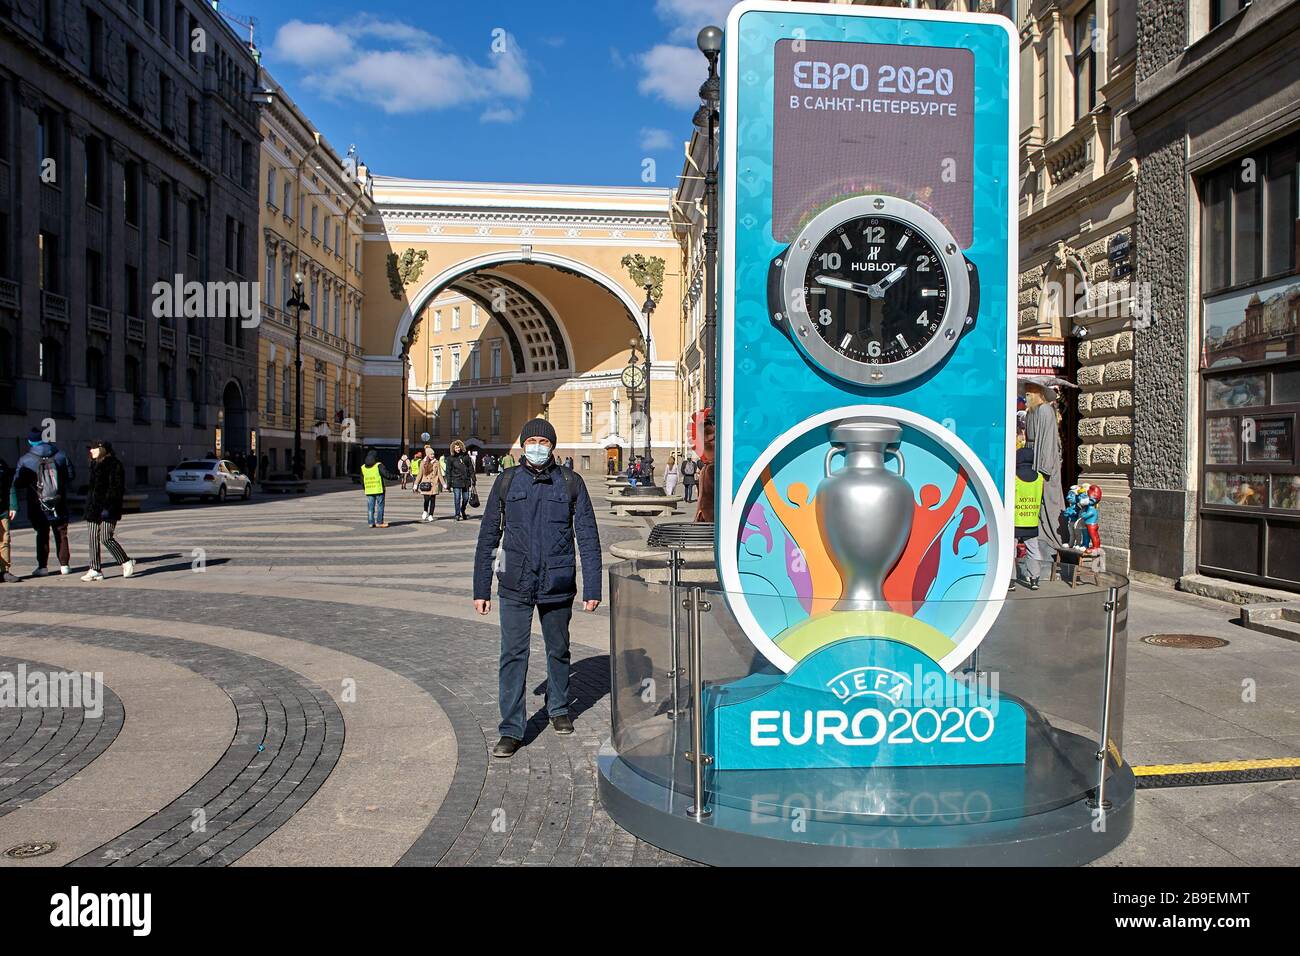 St. Petersburg, Russia - March 22, 2020: UEFA Euro 2020 postpones came as the number of confirmed coronavirus cases in Europe continued to rise with t Stock Photo